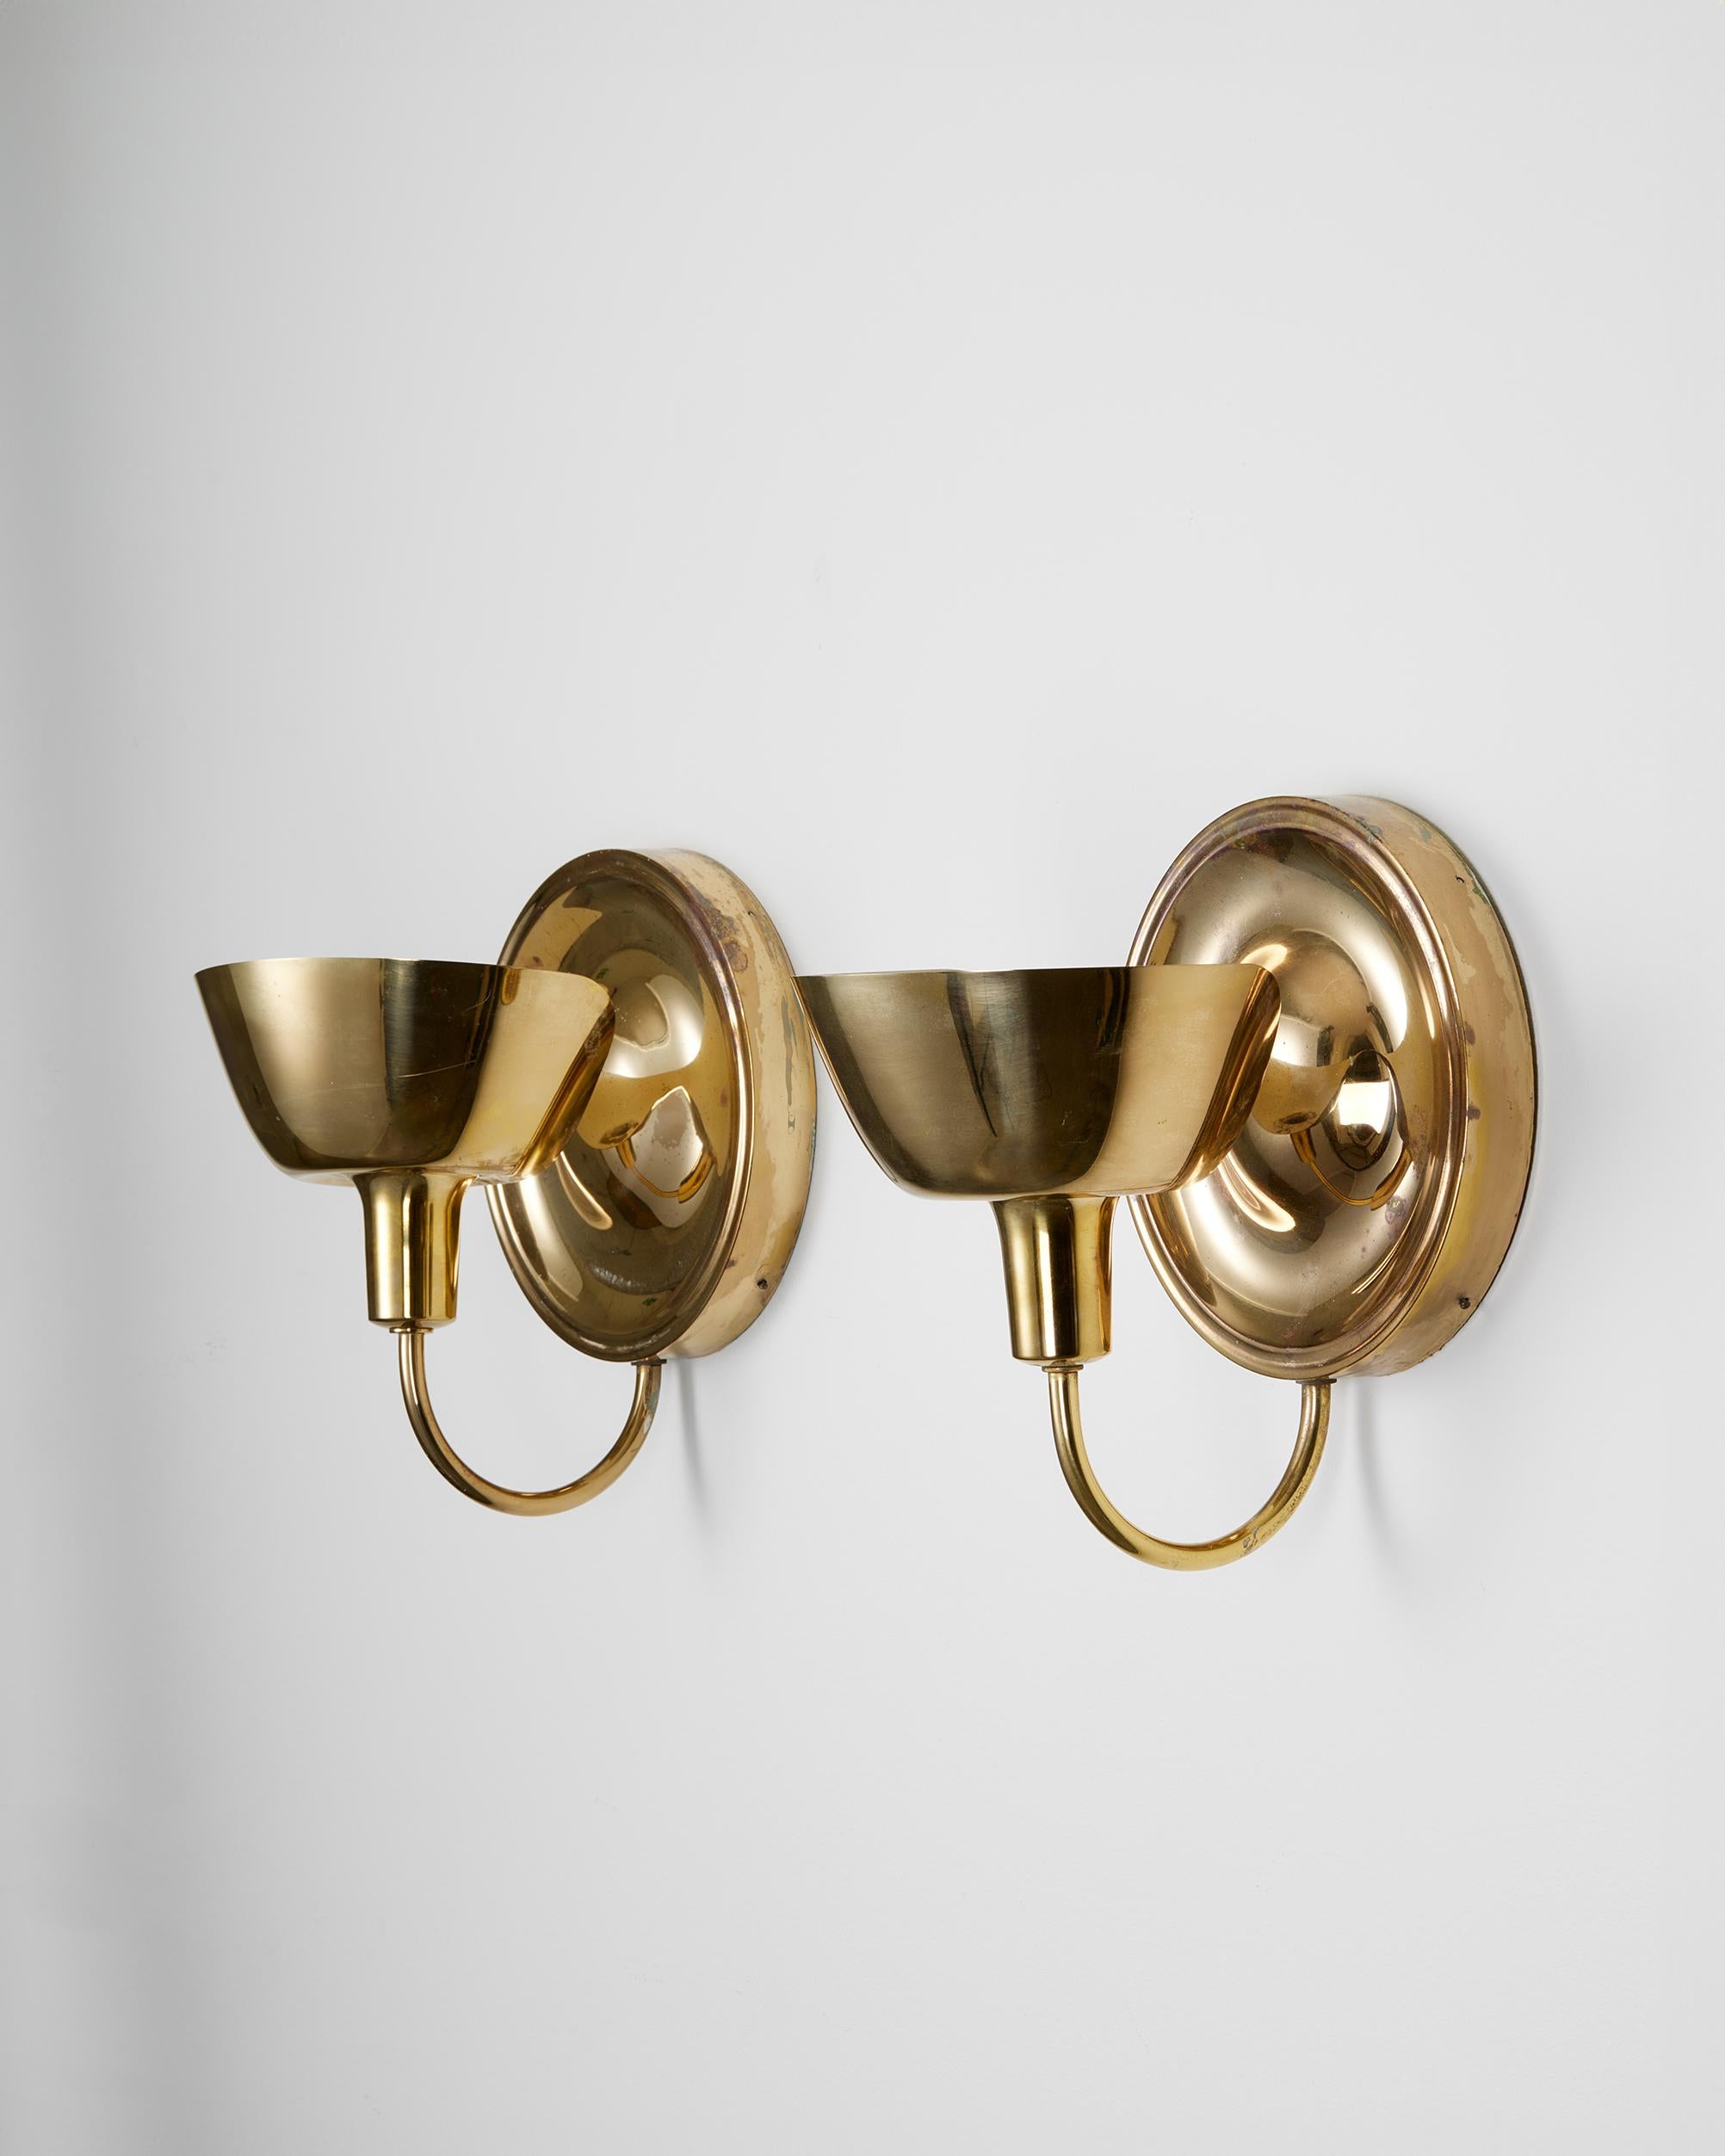 Pair of wall lights model 2389 designed by Josef Frank for Svenskt Tenn,
Sweden, 1950s.

Polished brass.

Josef Frank was a true European, he was also a pioneer of what would become classic 20th century Swedish design and the “Scandinavian Design